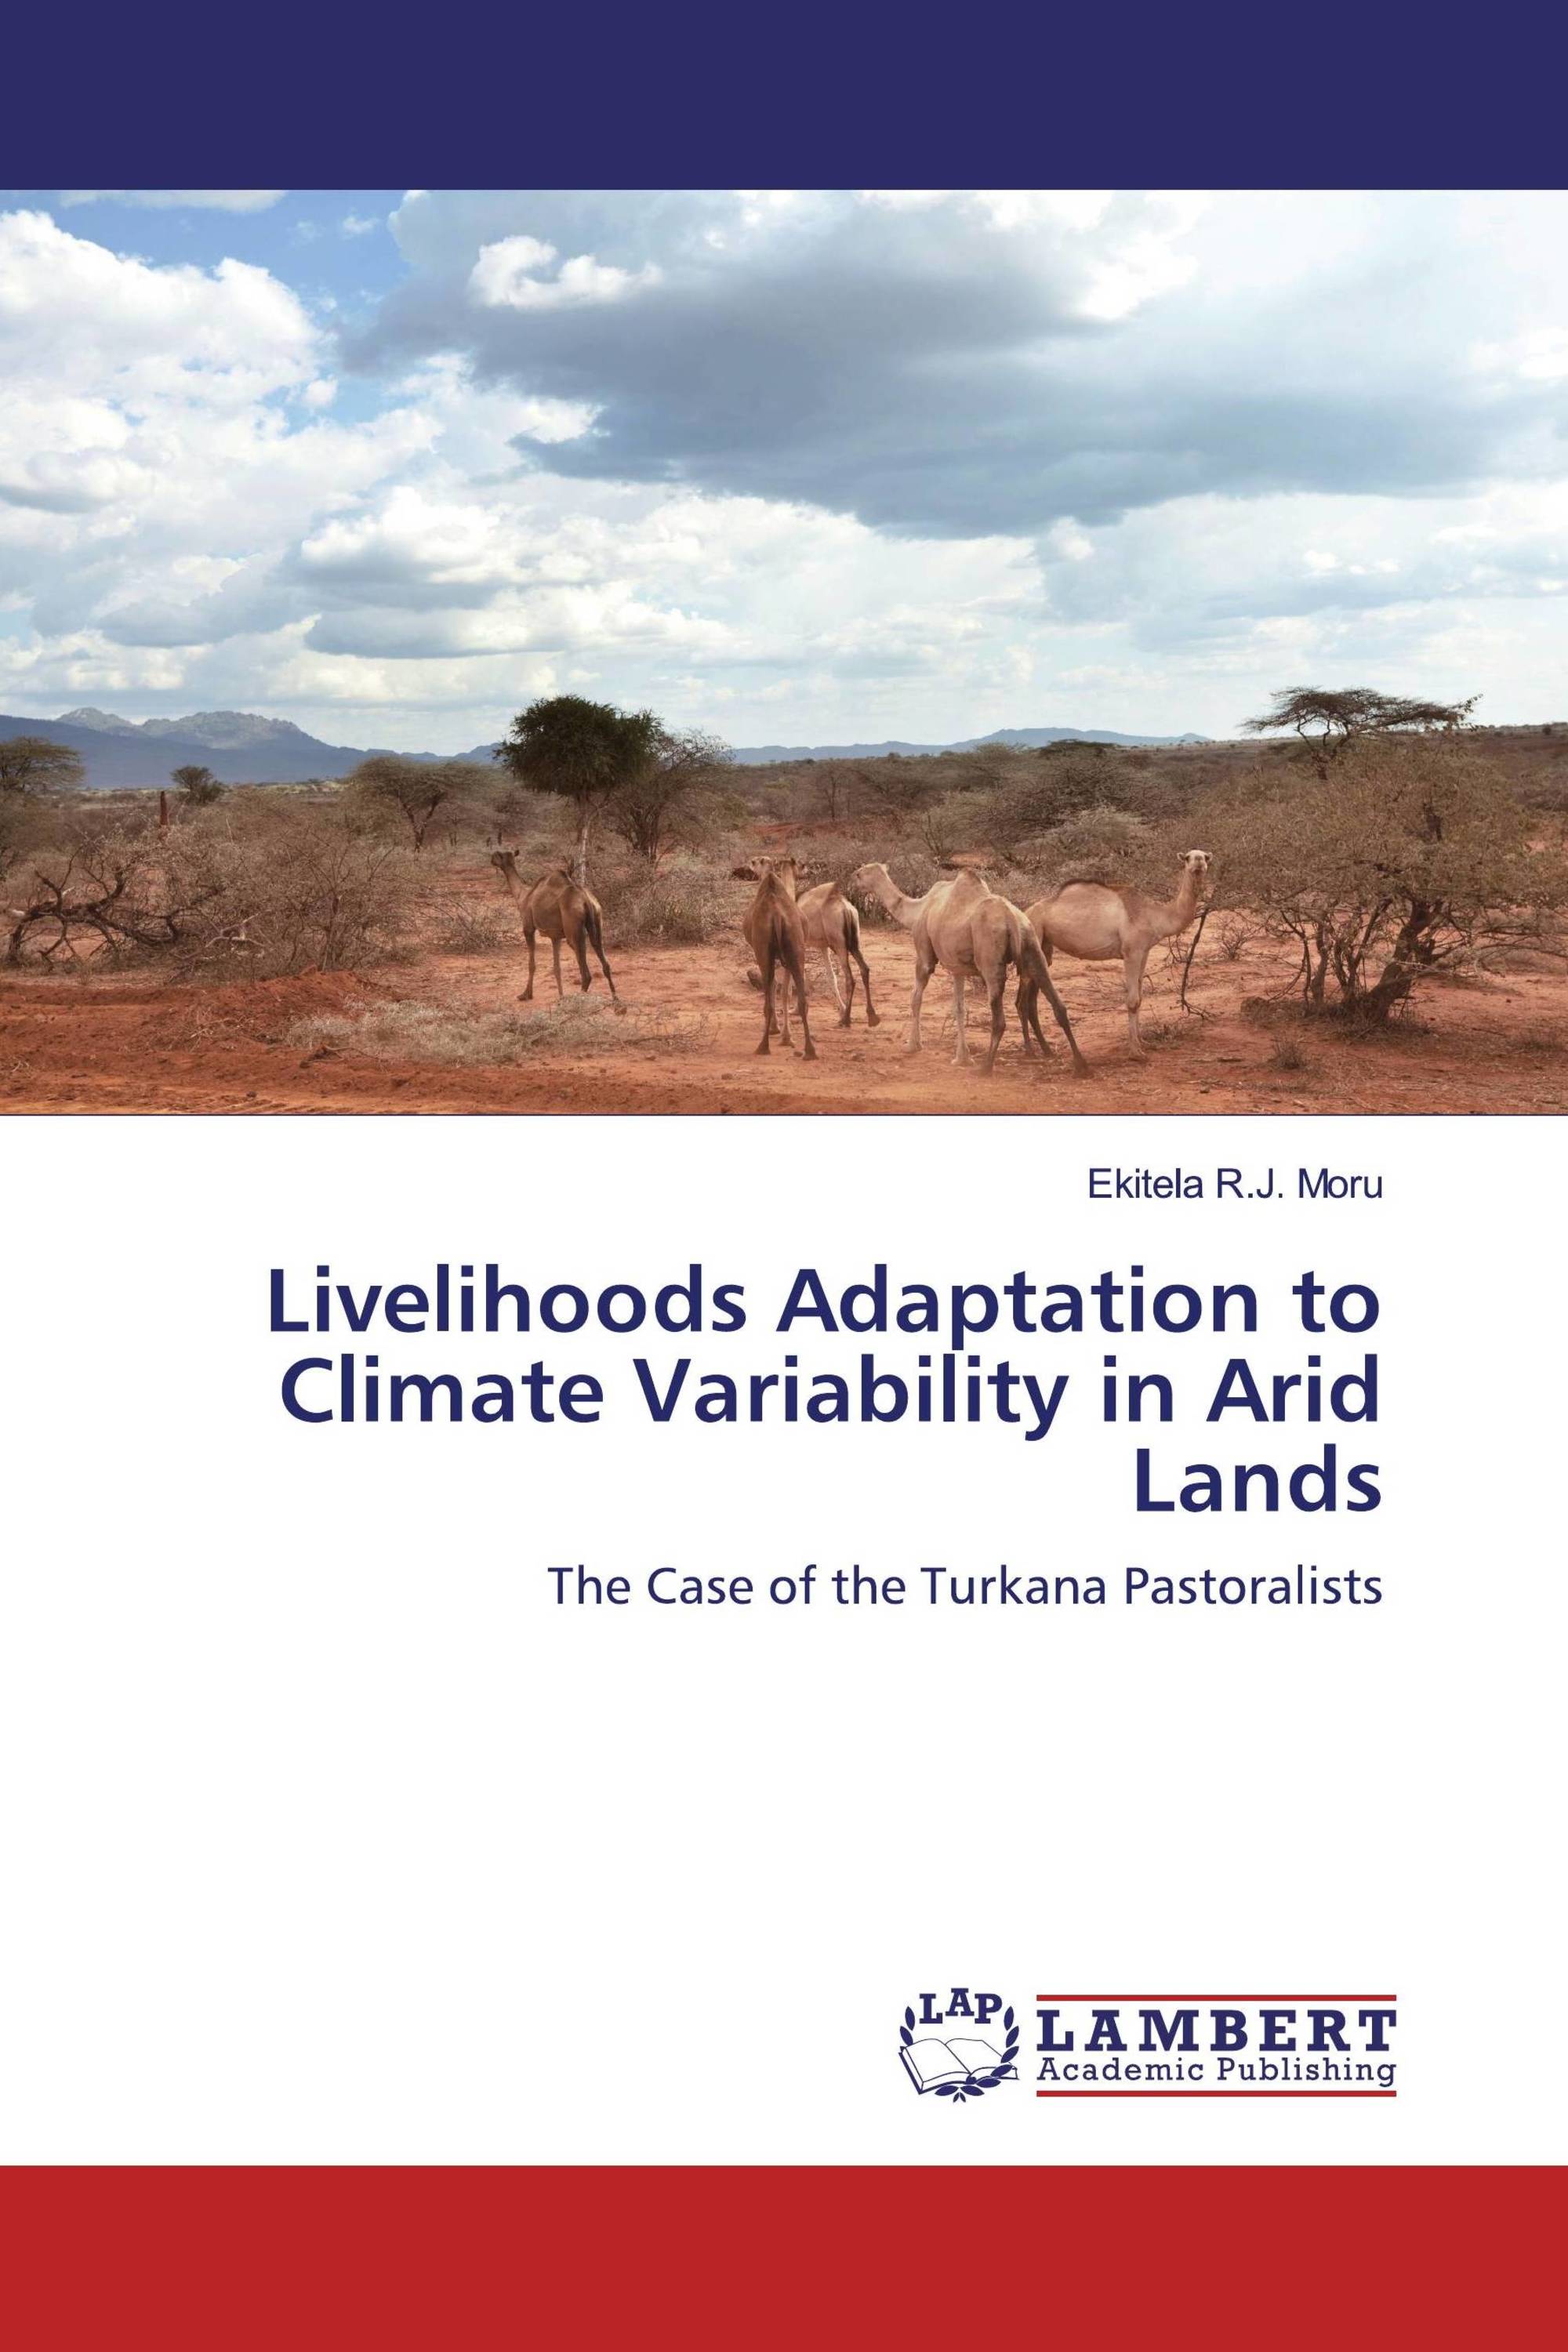 Livelihoods Adaptation to Climate Variability in Arid Lands